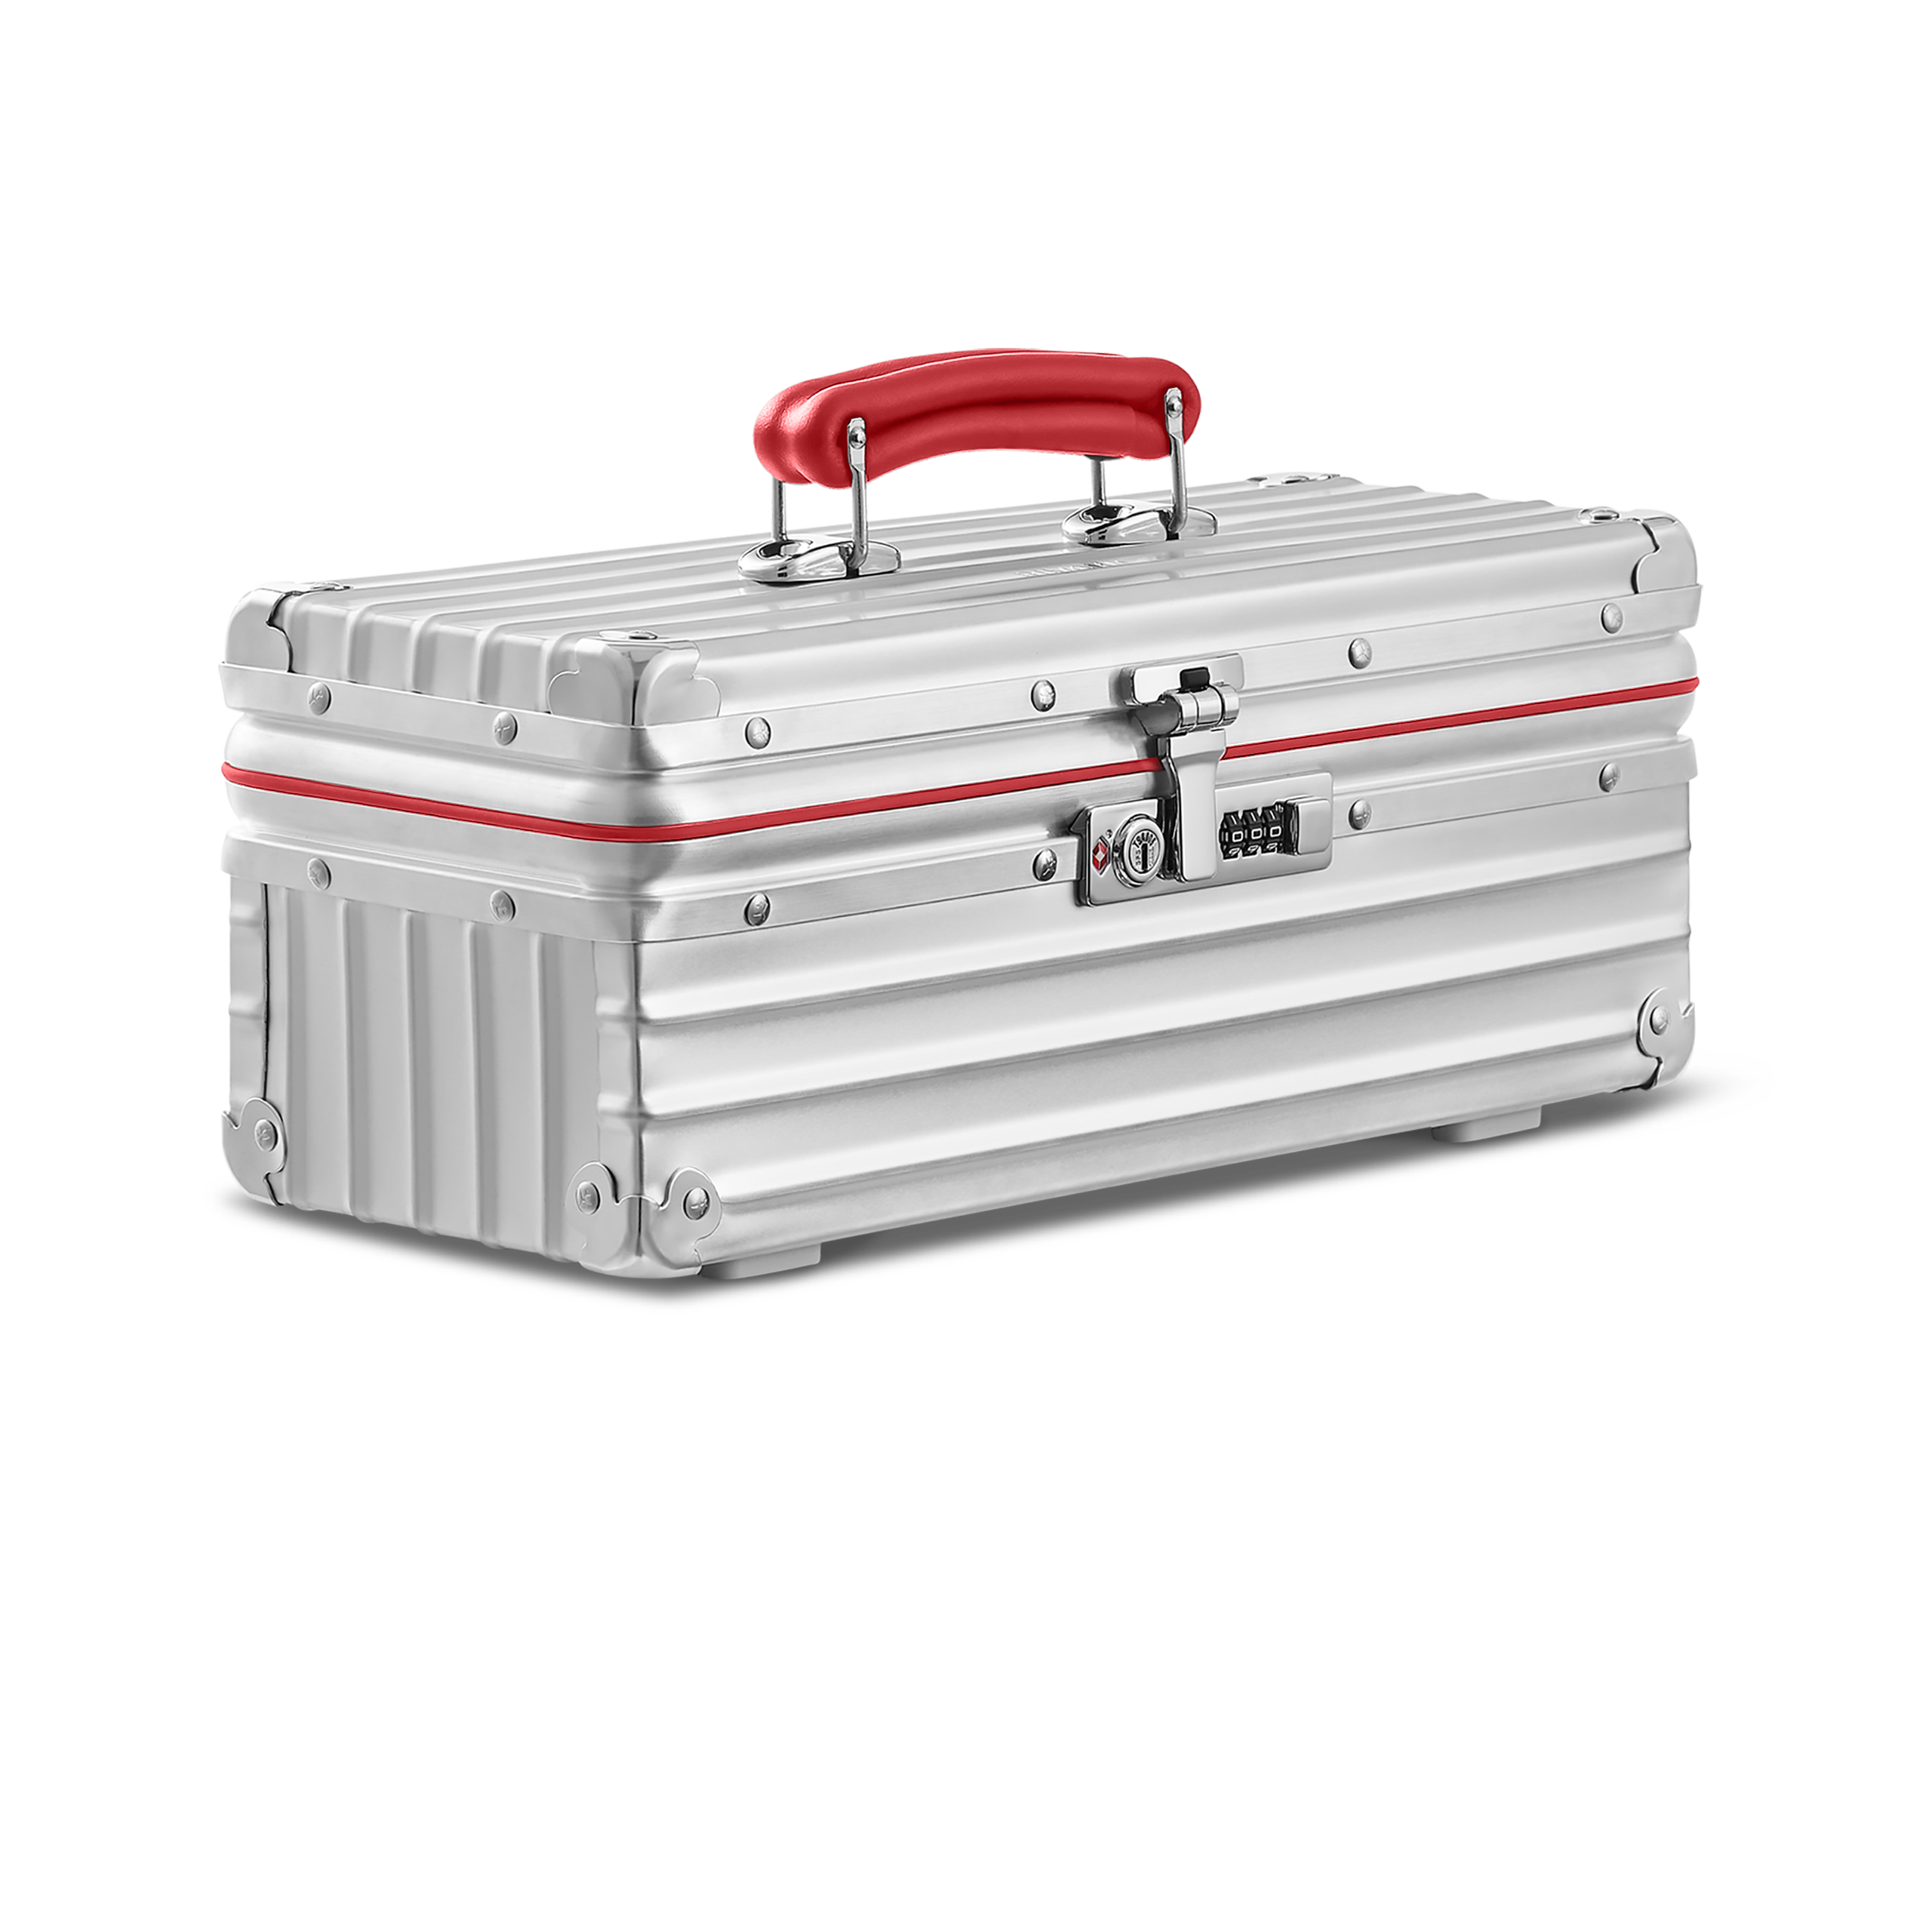 The new colorway of the Rimowa One Bottle Case will be launched in January in celebration of Chinese New Year. Photo: Rimowa